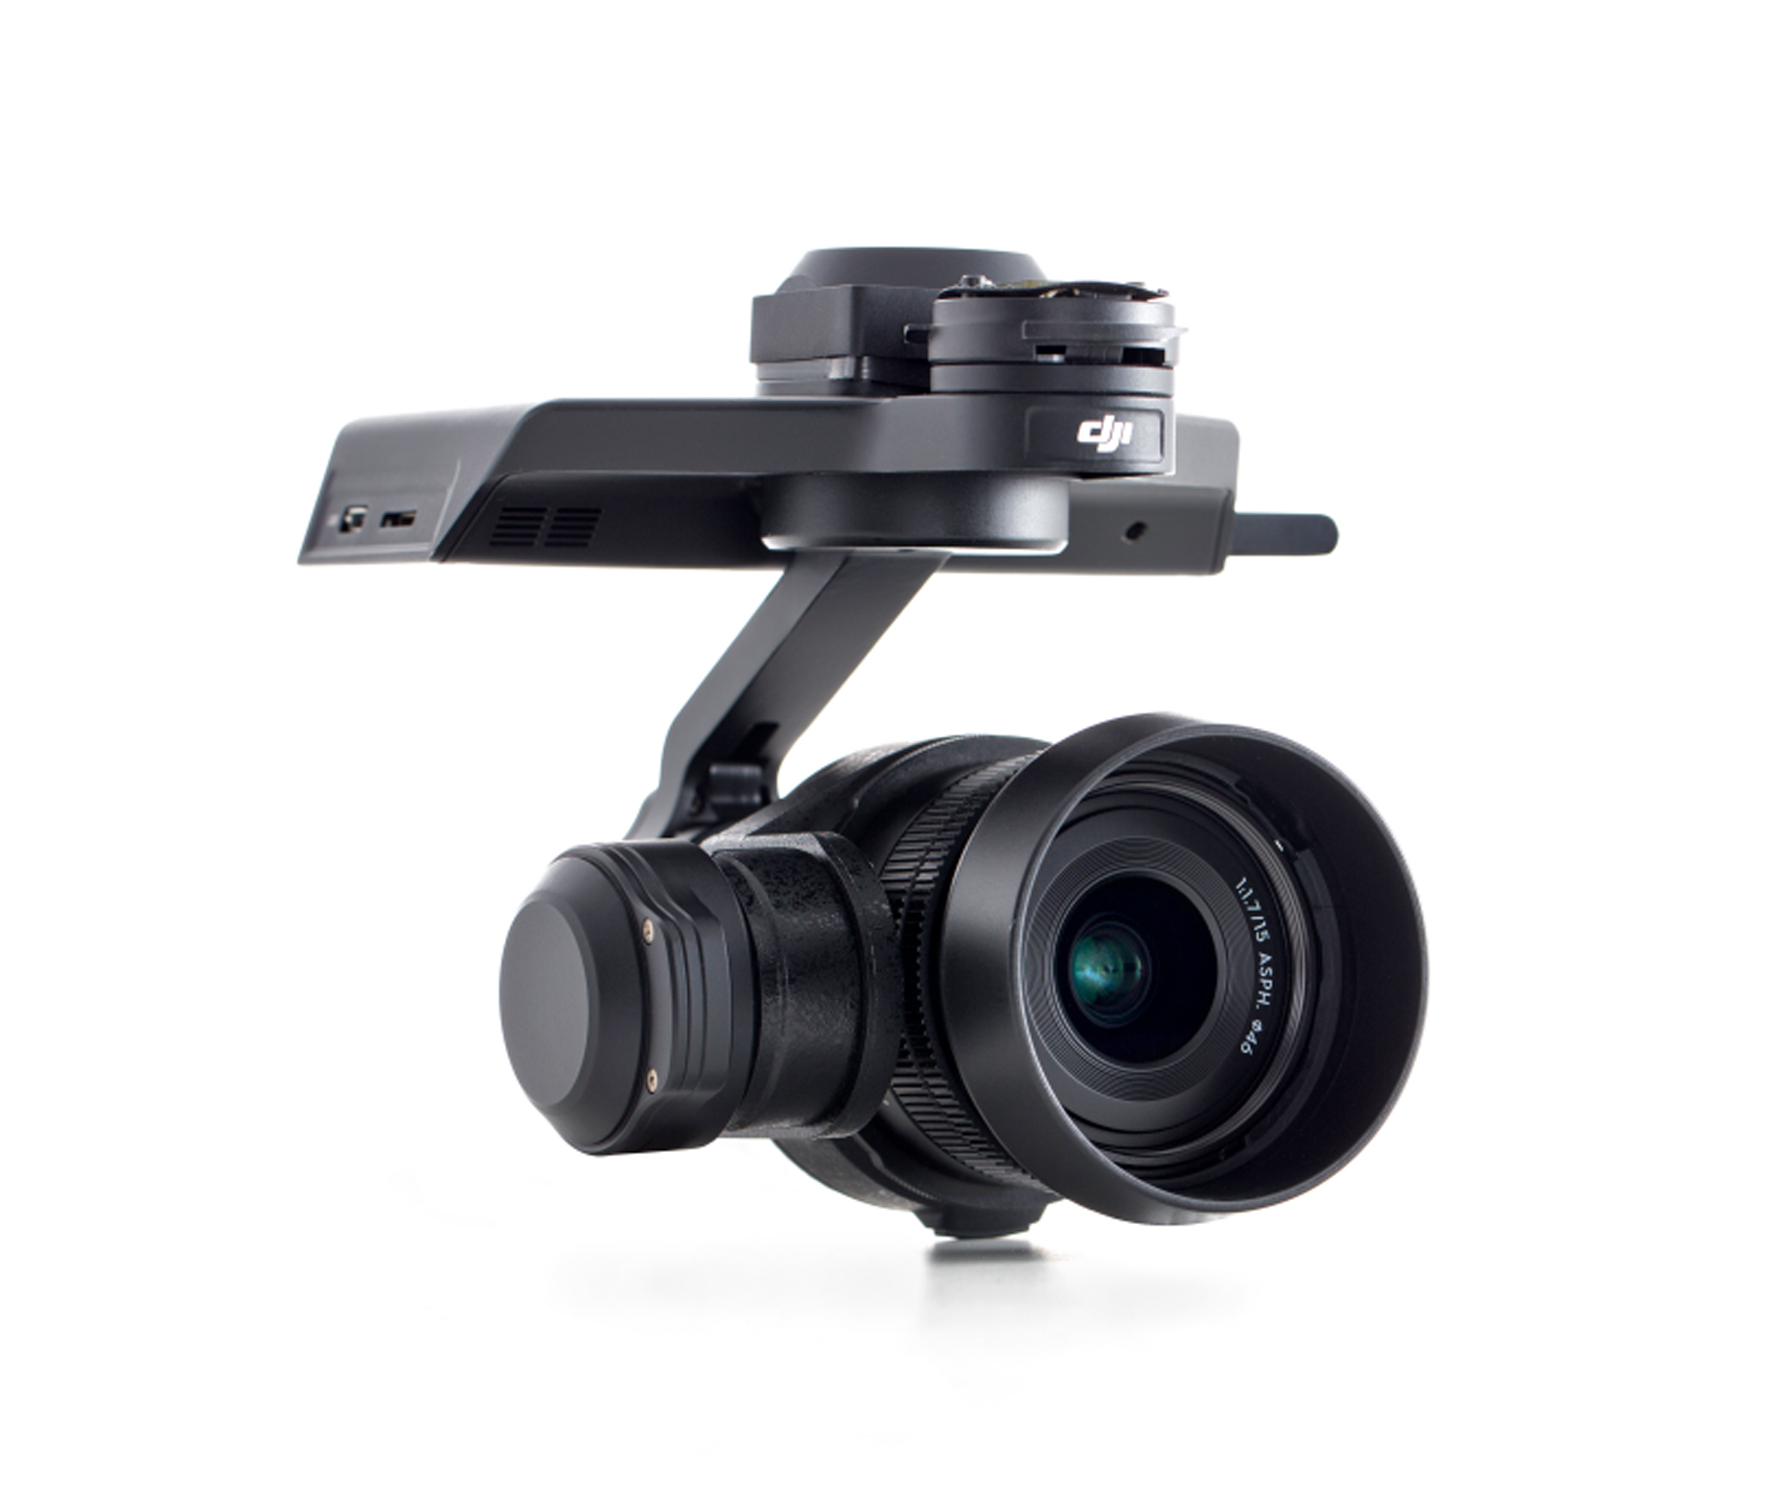 DJI Zenmuse X5R RAW Camera and Gimbal with 15mm F/1.7 Prime Lens